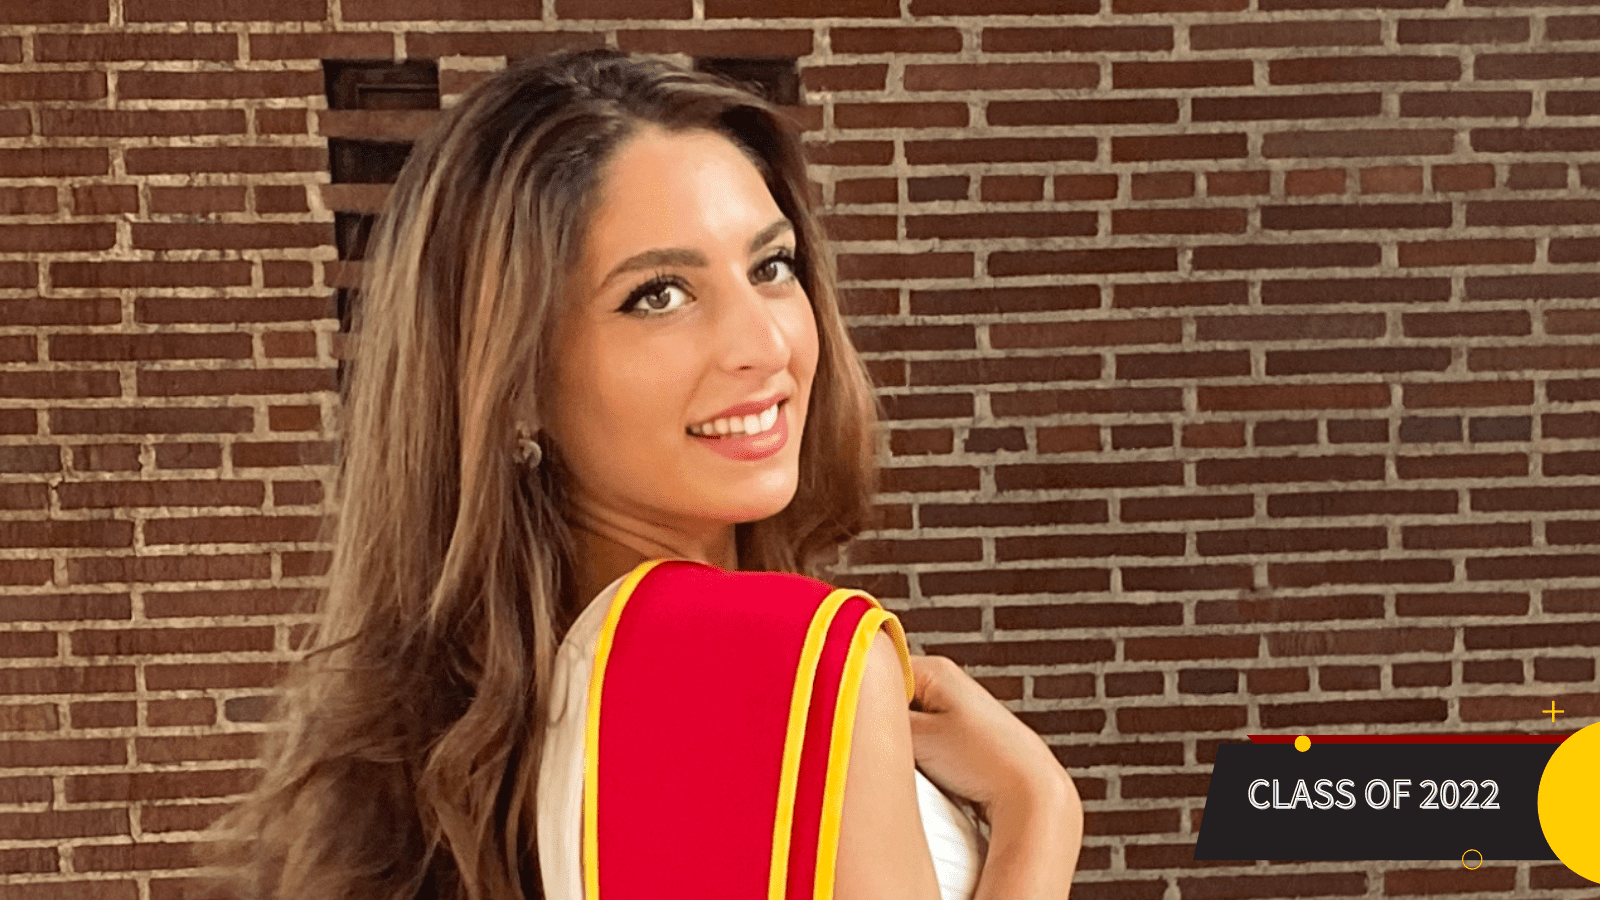 Jessica Haddad in a commencement sash with a graphic saying "Class of 2022"